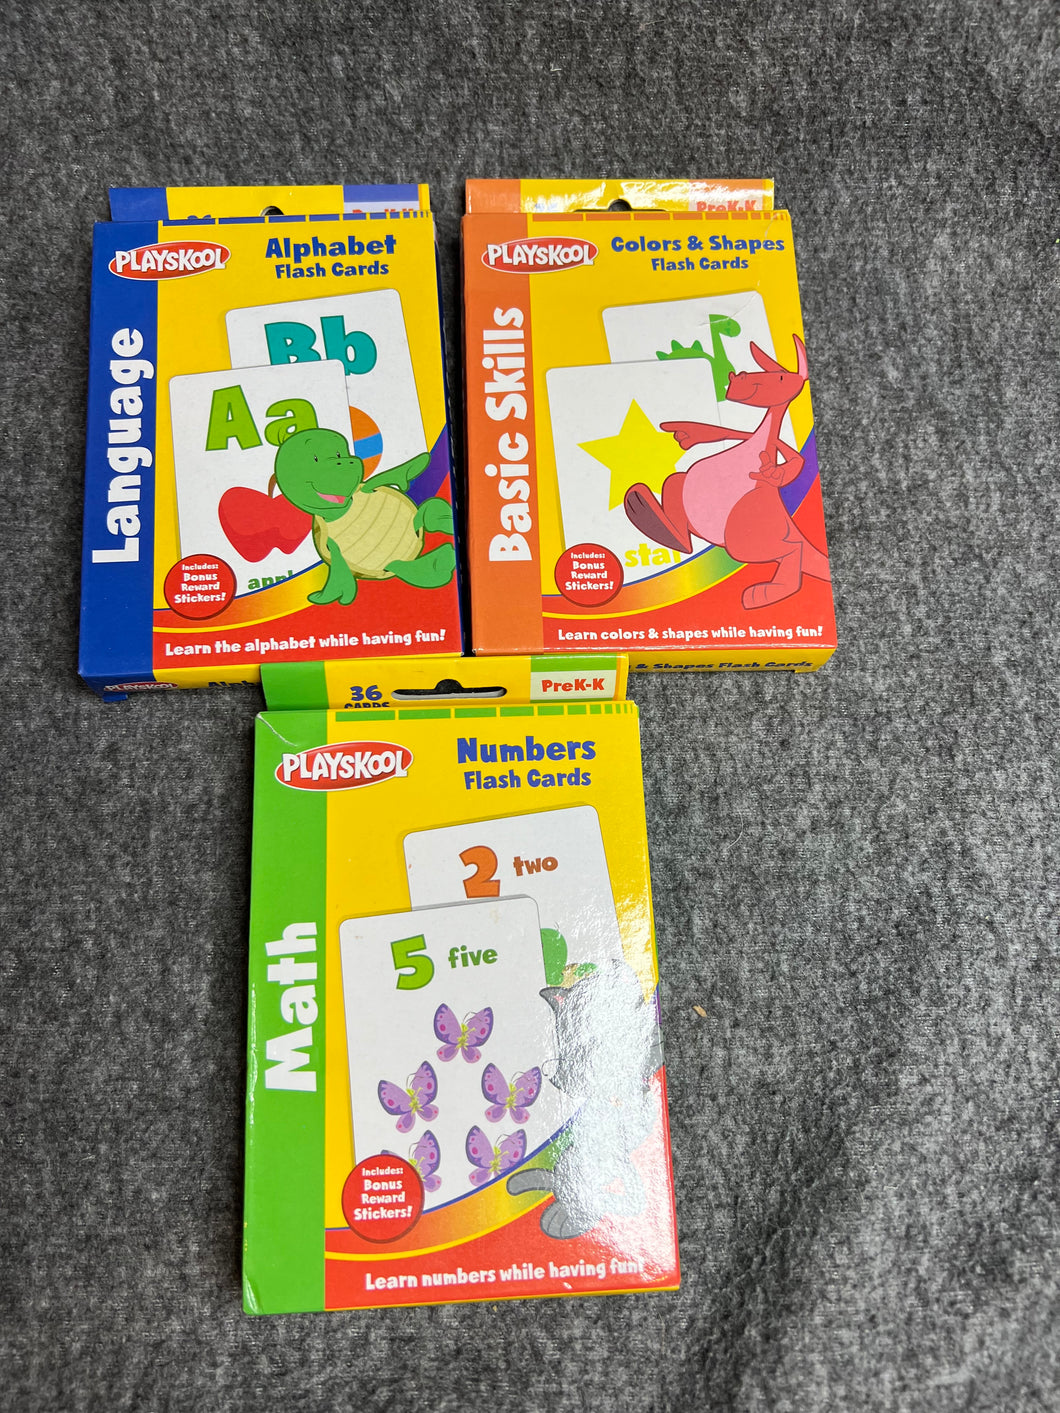 Playskool Flashcards for Letters, Numbers, Colors, and Shapes One Size